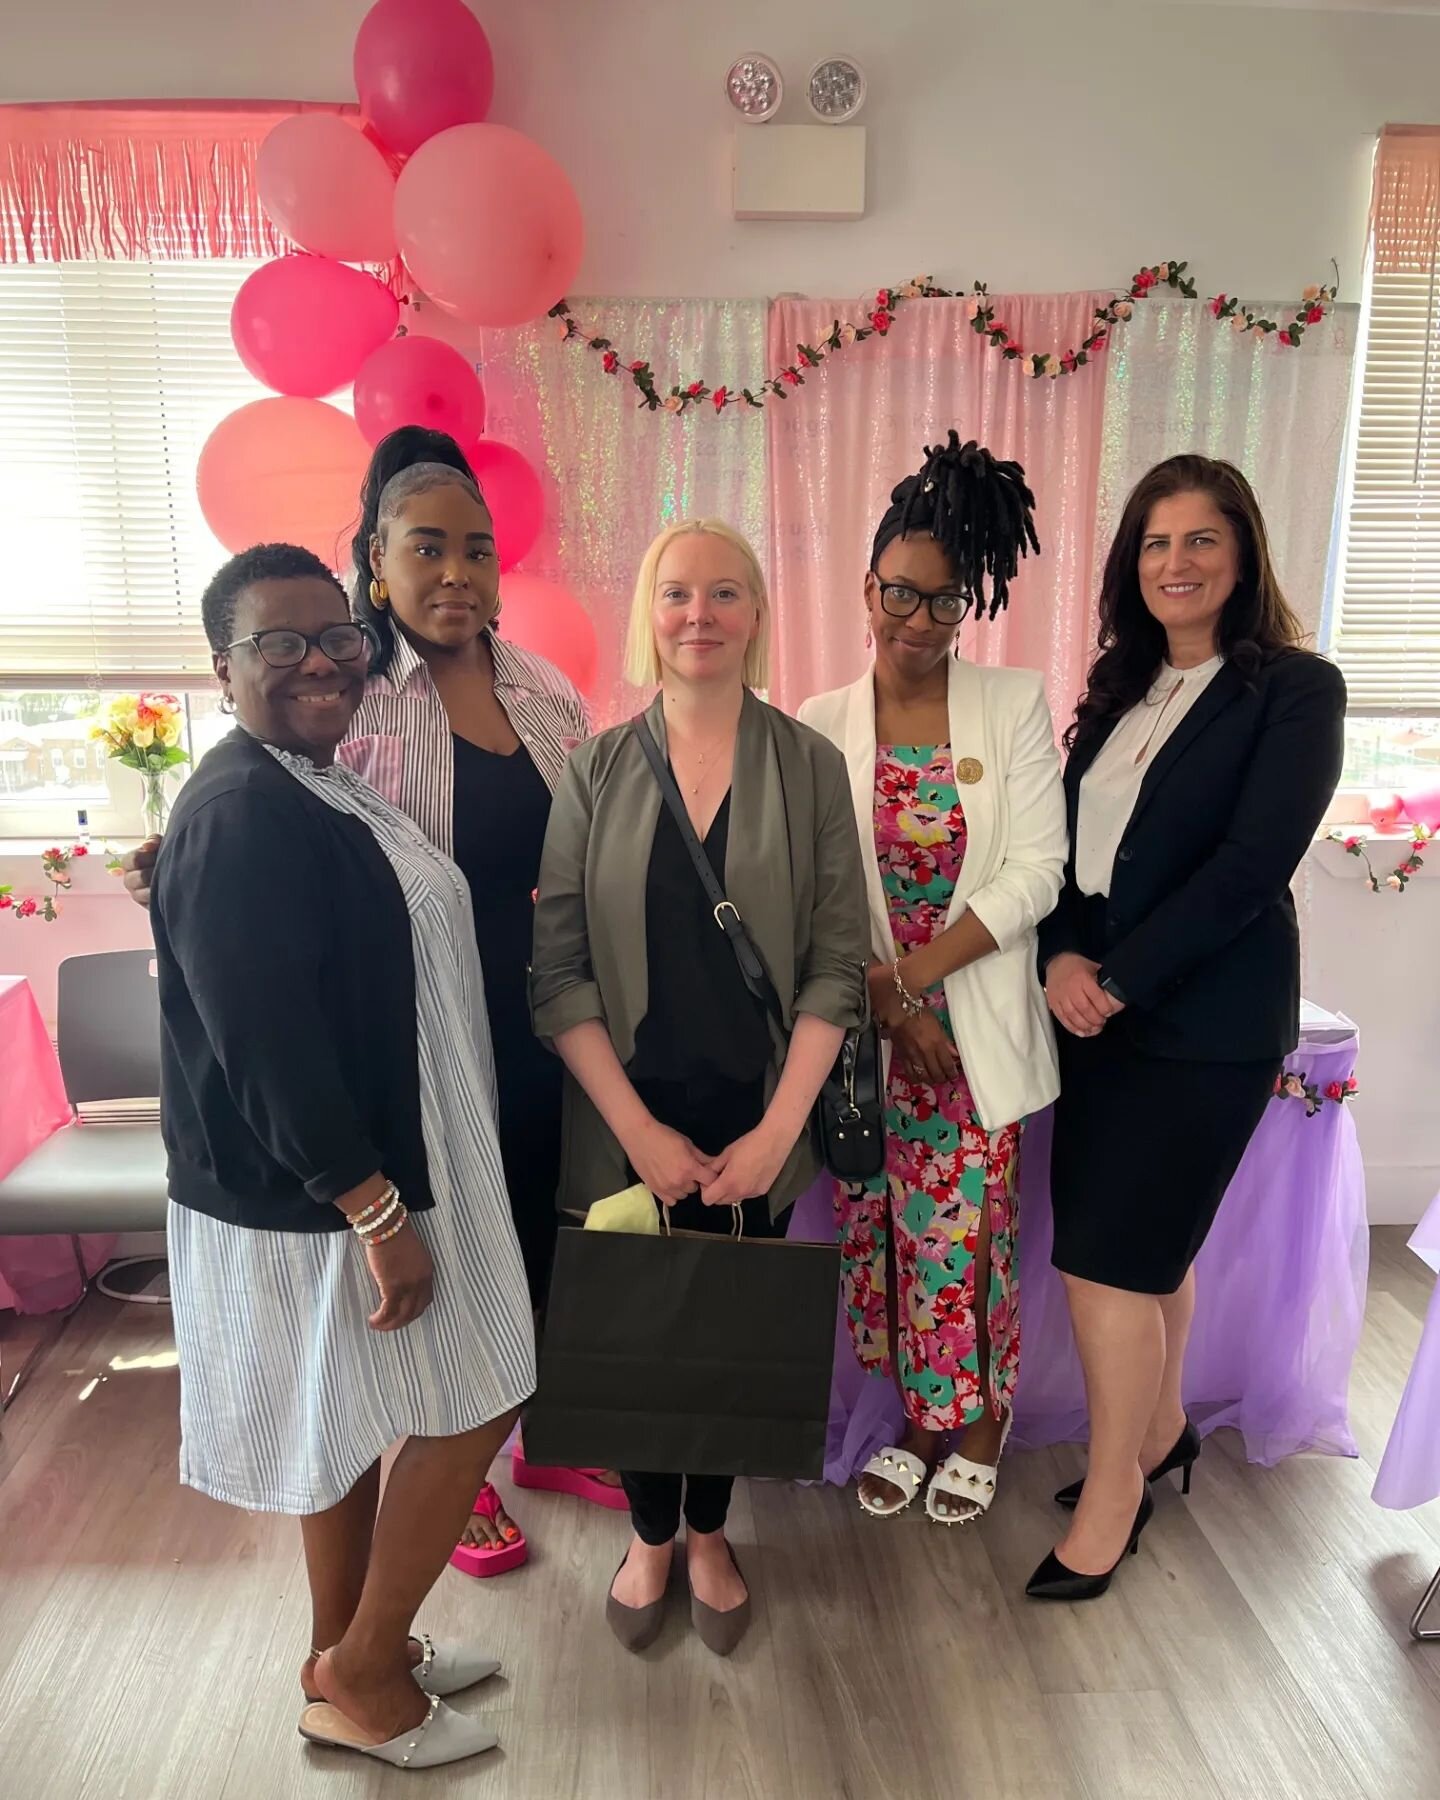 Today was our Mother's Day celebration at our East New York Transitional Family Shelter and what a MANICURE SPECTACULAR it was! Together we were able to provide the nearly 60 moms in the residence with manicures. Thank you to everyone who donated and